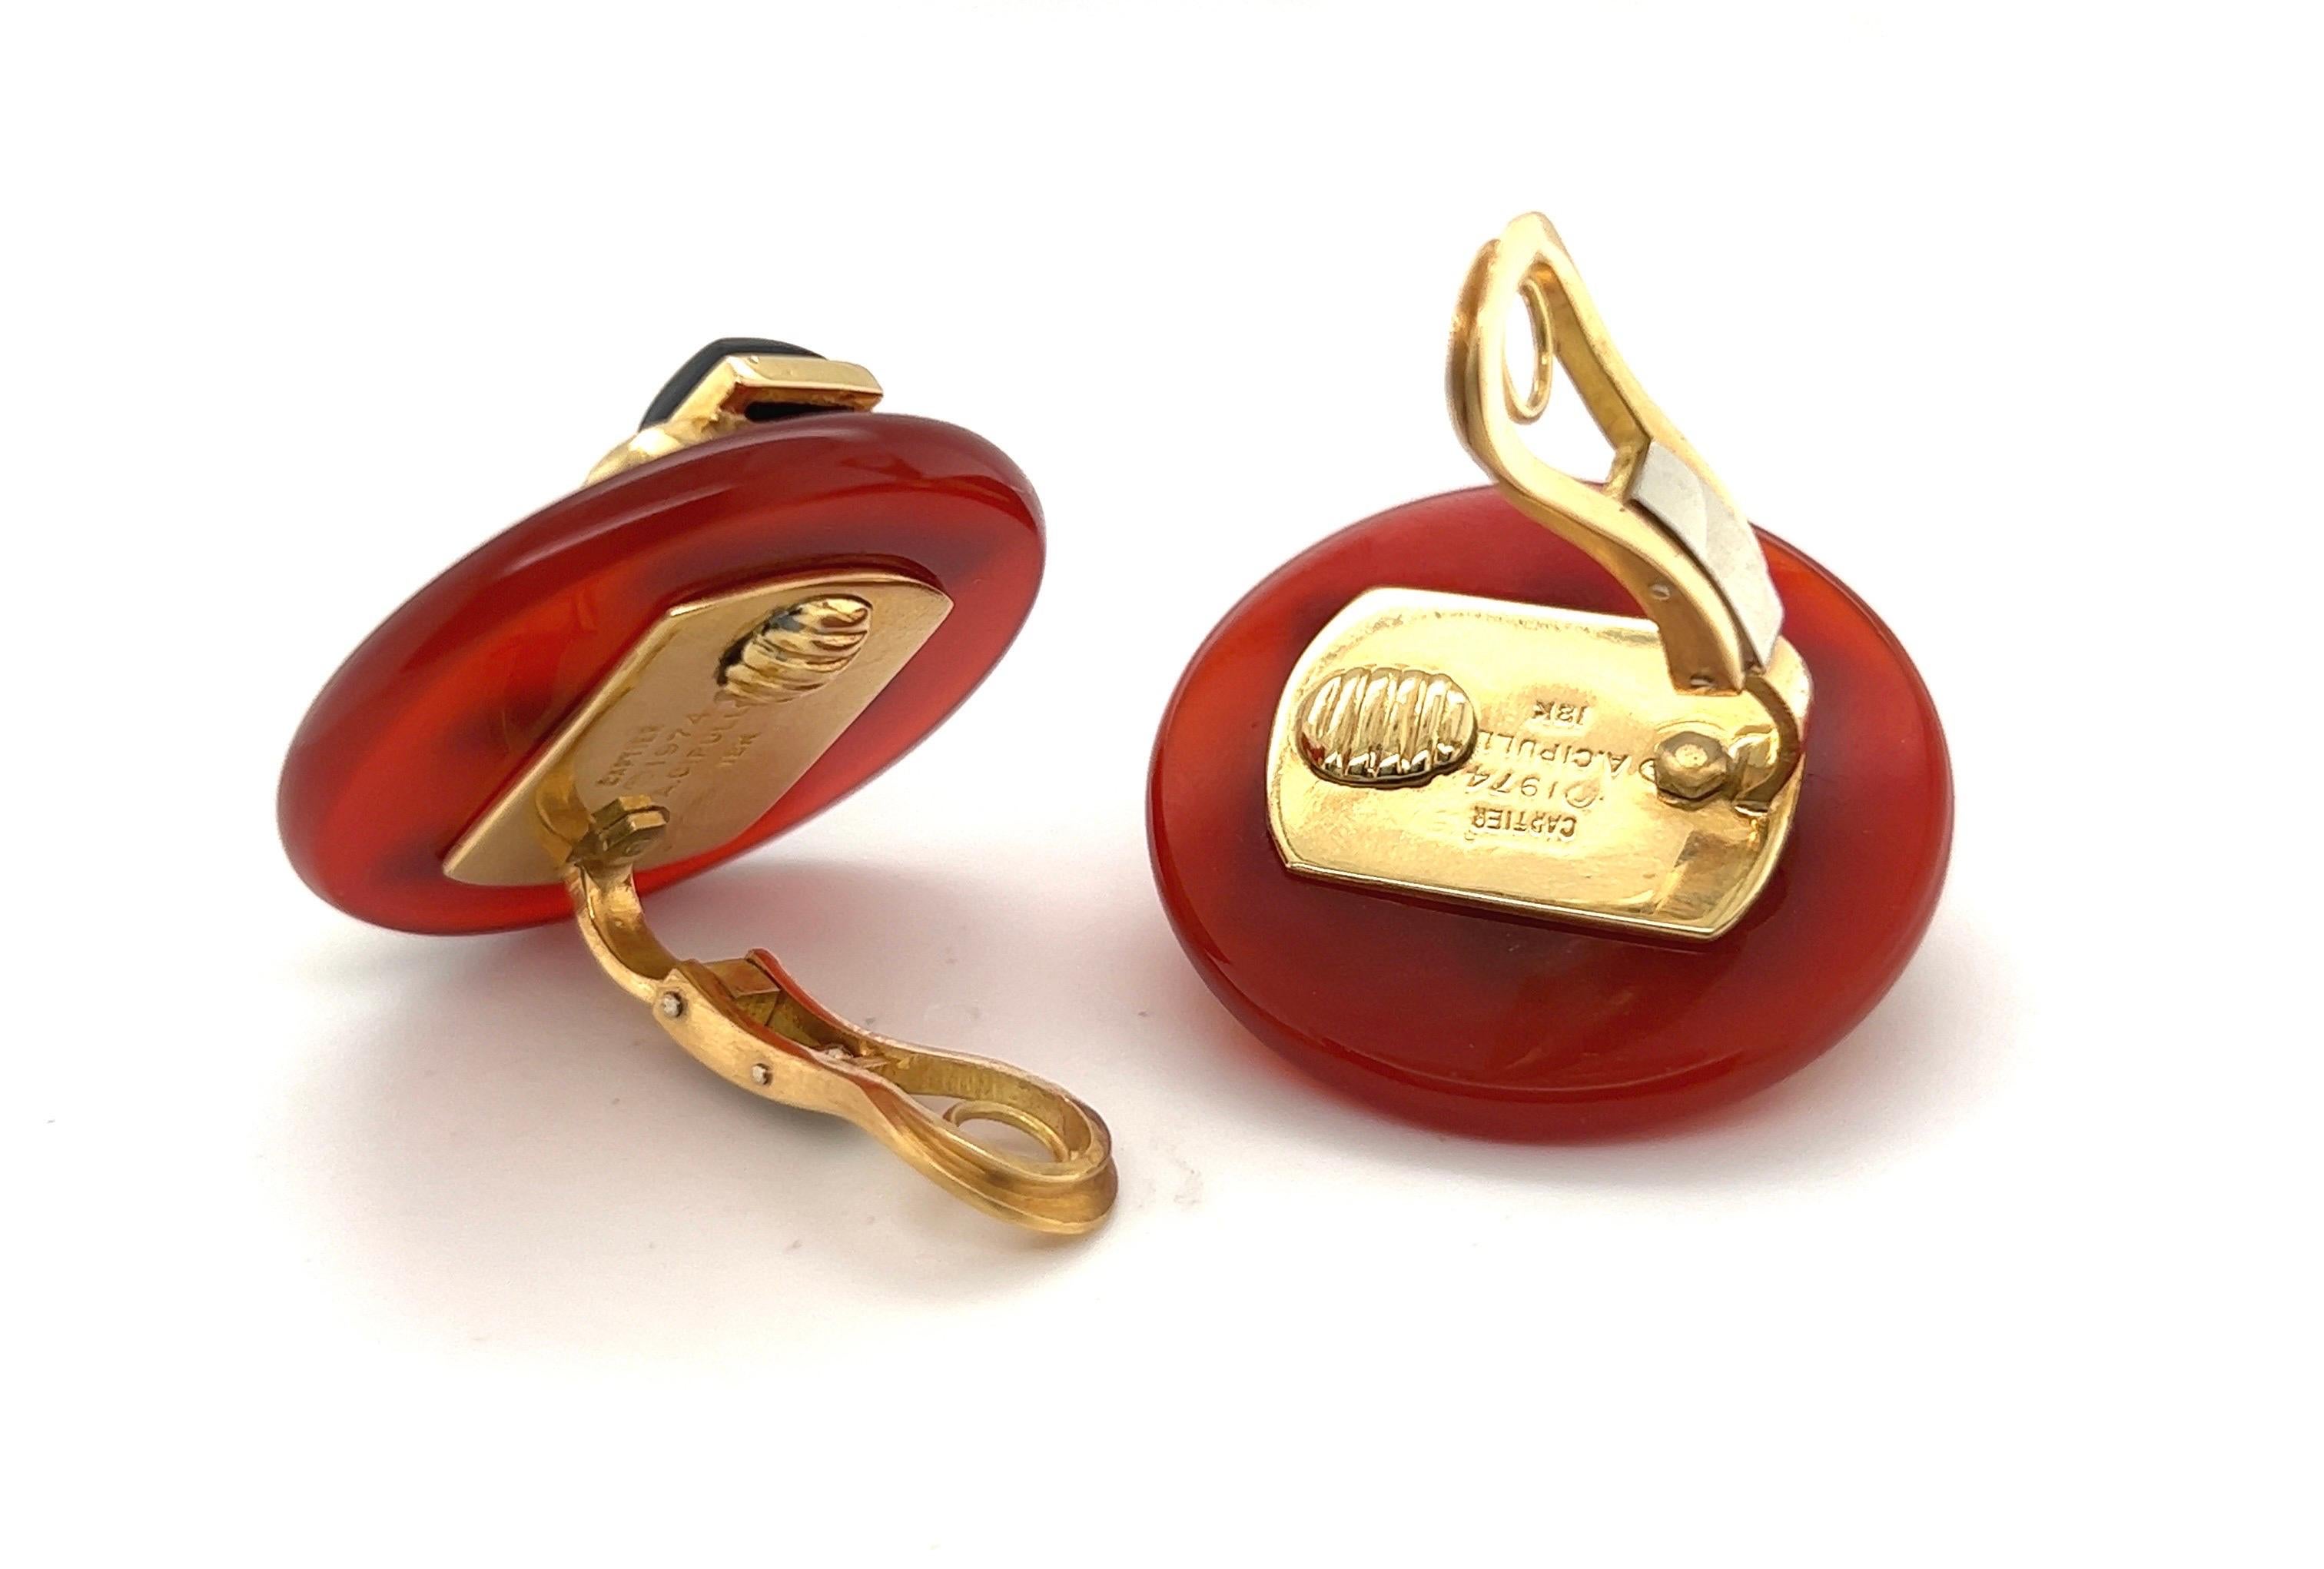 Iconic 18 karat gold, carnelian and onyx earrings designed by Aldo Cipullo for Cartier in 1974.
Geometrically designed ear clips each consisting of a deep red carnelian disc decorated with a trio of onyx sugarloaf cabochons set in yellow gold. The